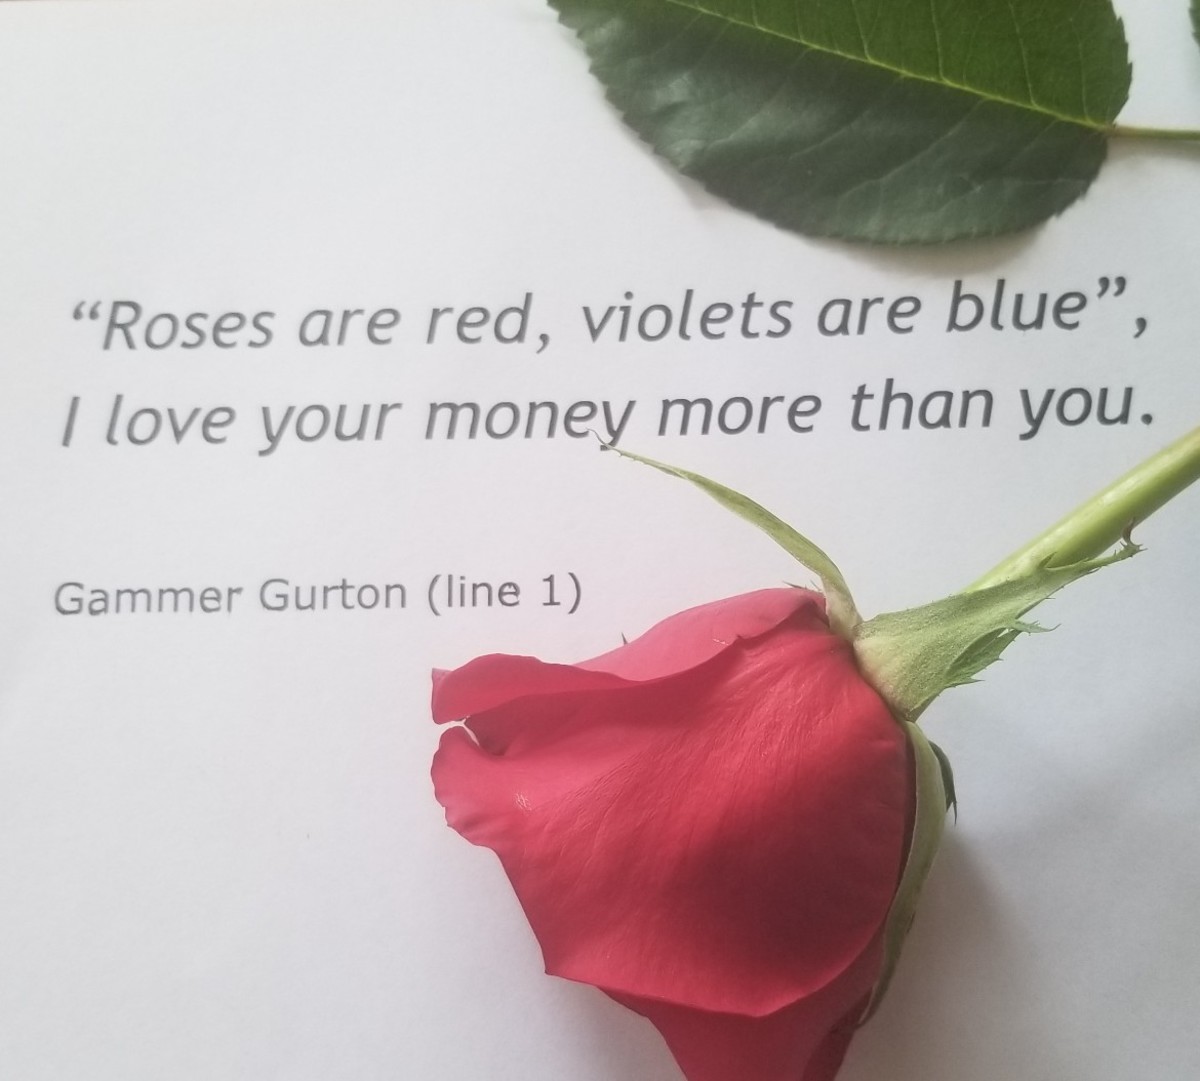 The poem reads a lot differently when you are wooed by a romantic scammer.